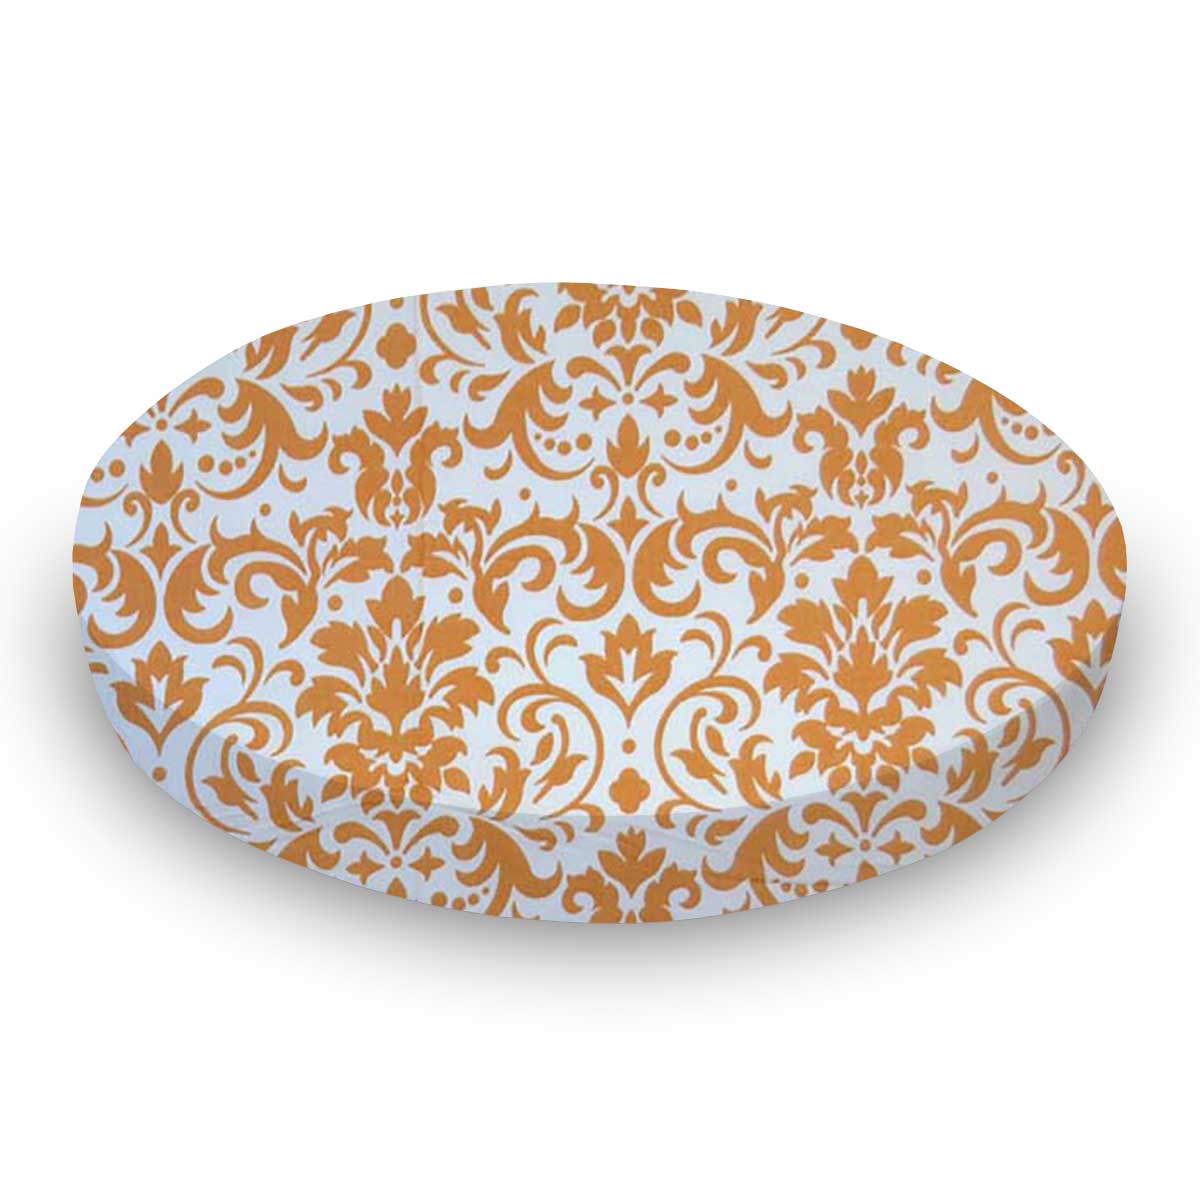 SheetWorld Fitted Round Crib Sheet - 100% Cotton Woven - Gold Damask,